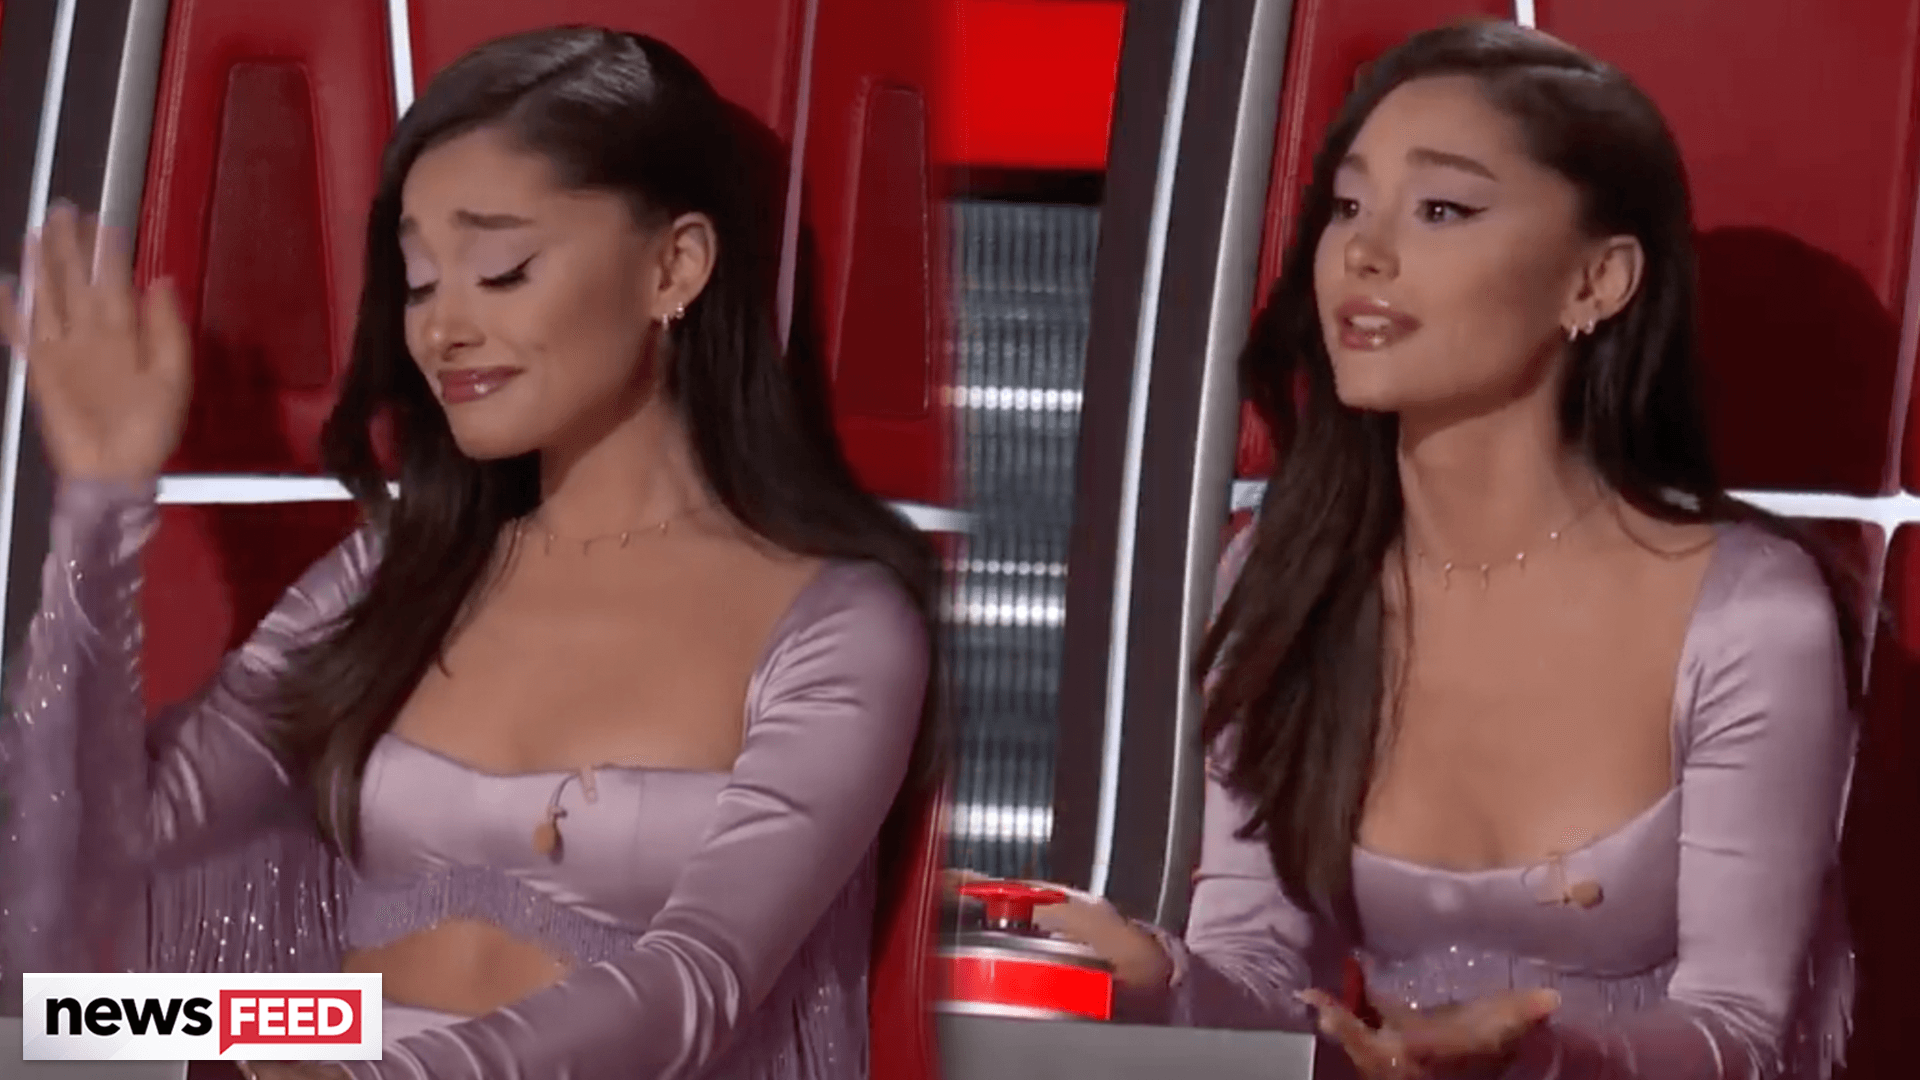 Ariana Grande Flashes Her Toned Abs In A Crop Top On 'The Voice'